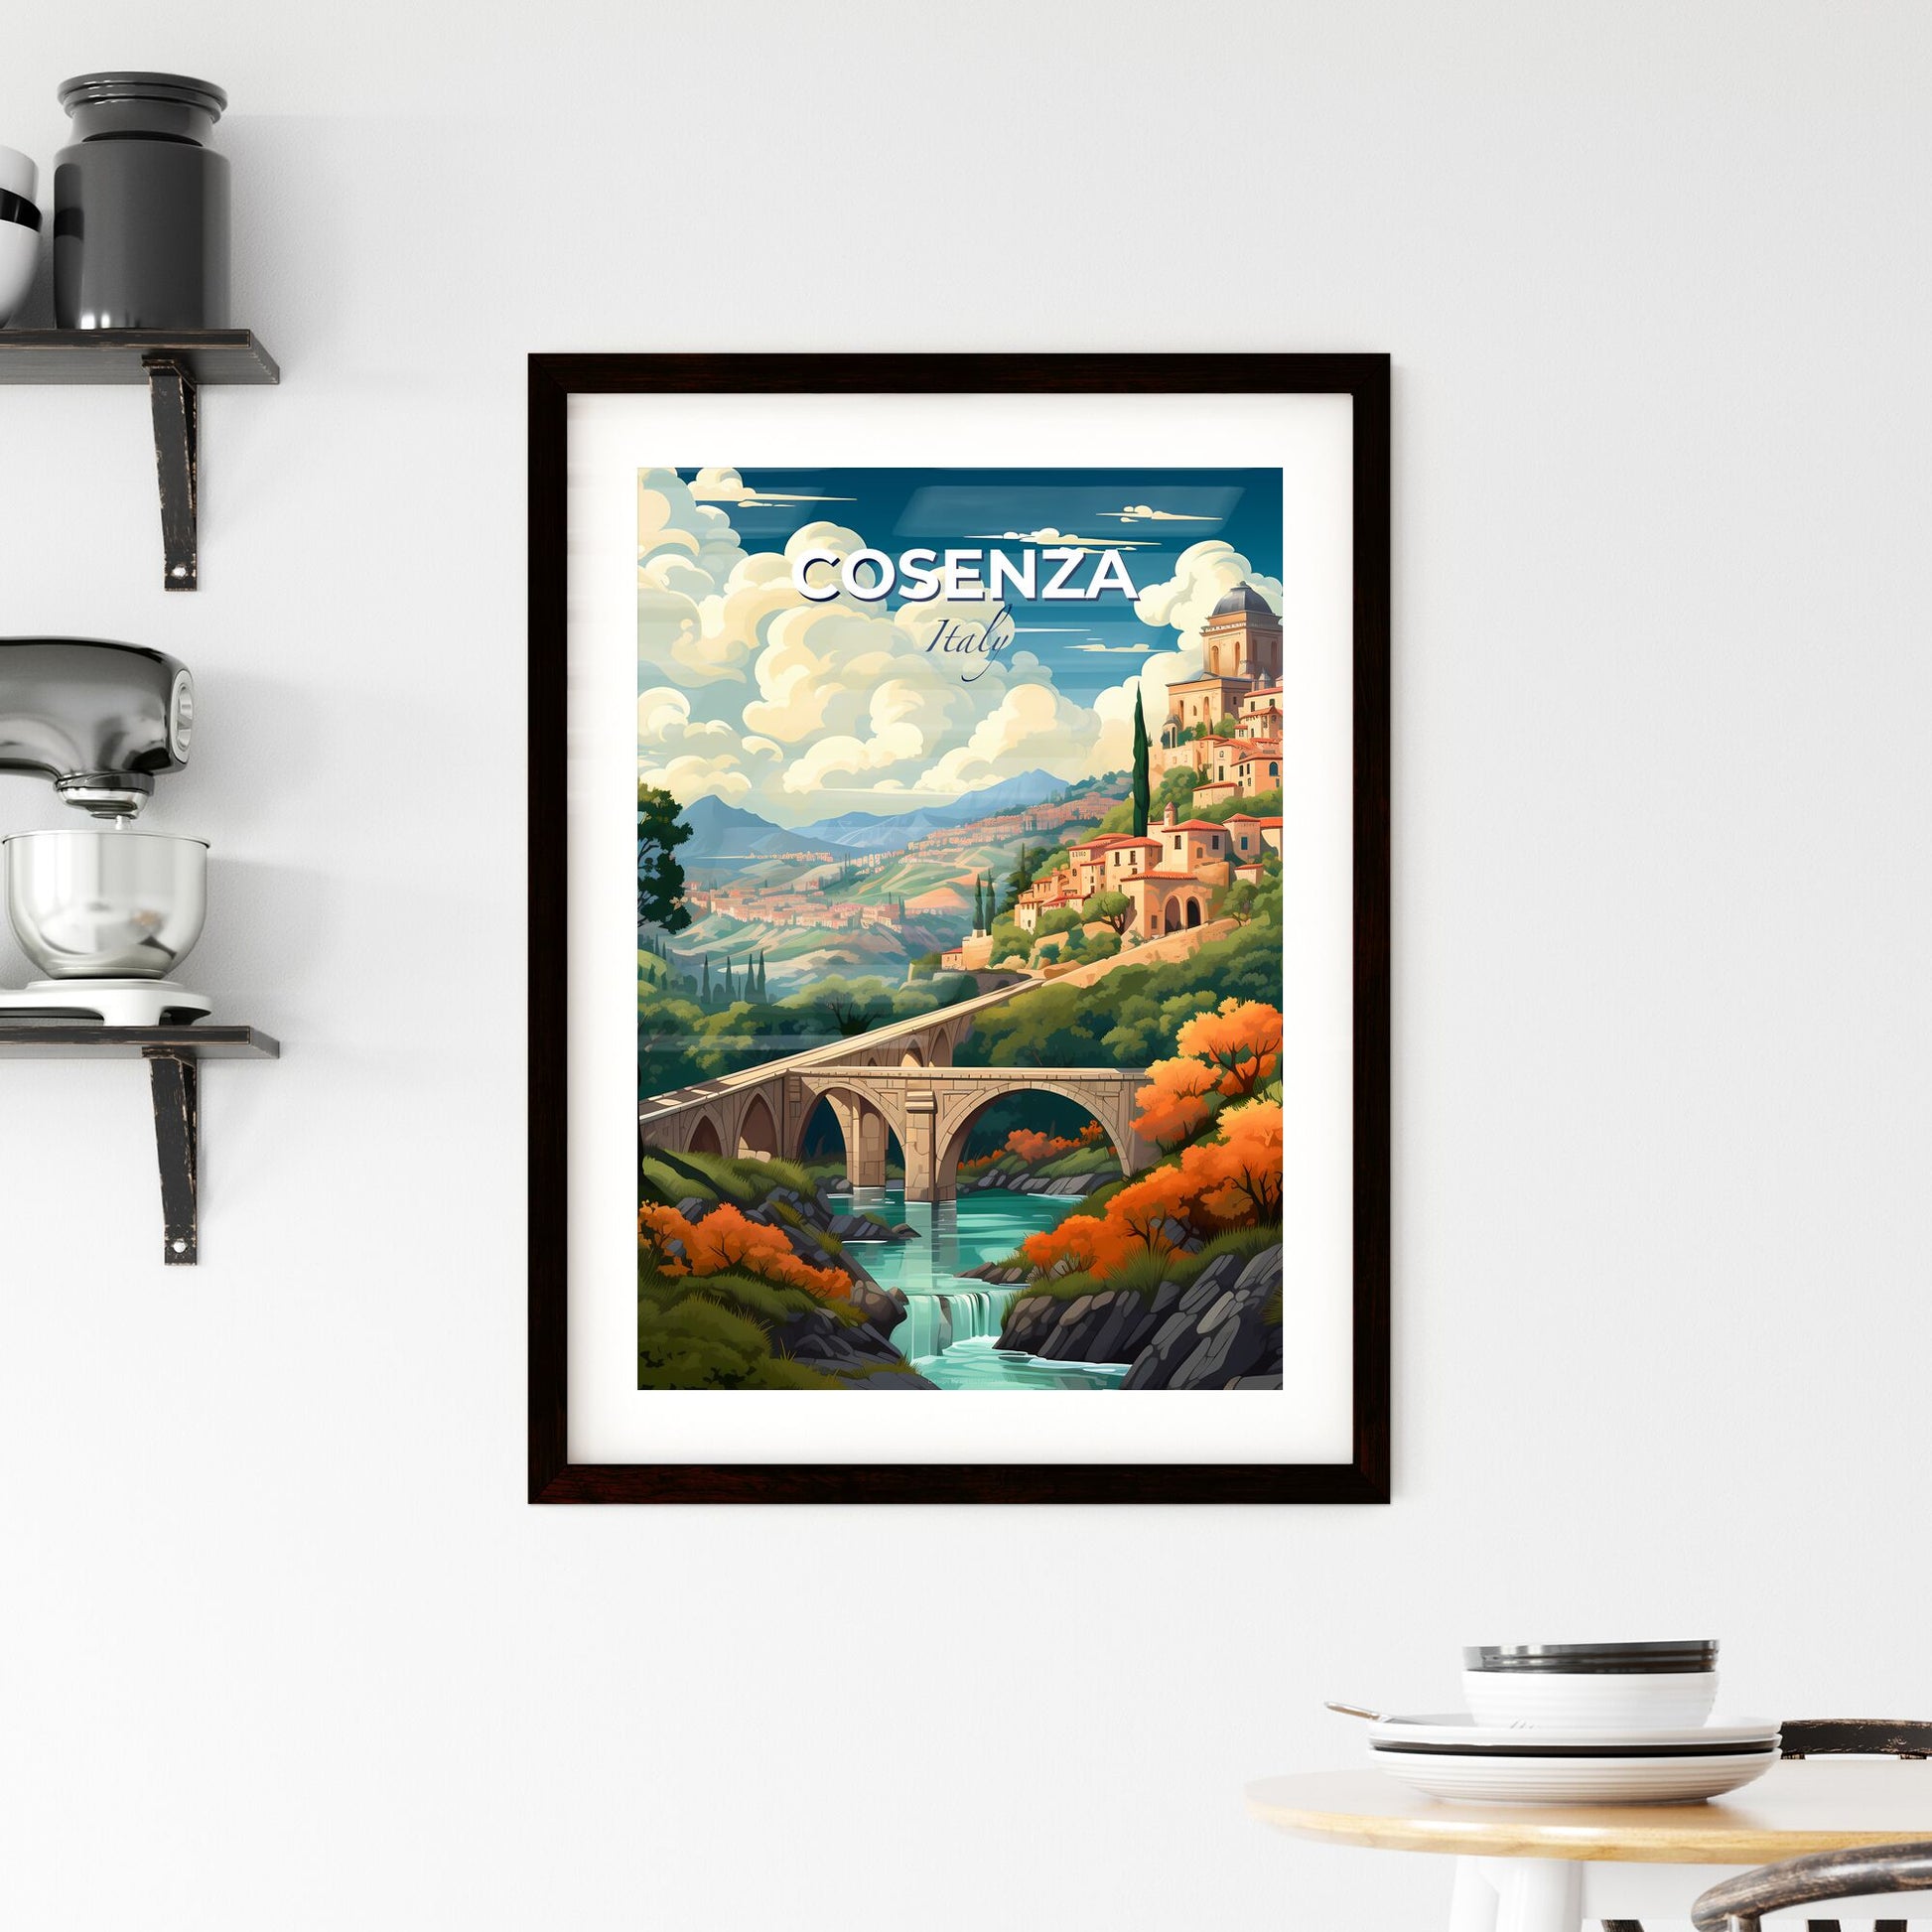 Cosenza, Italy, A Poster of a bridge over a river with a stone bridge and a town on the hill Default Title